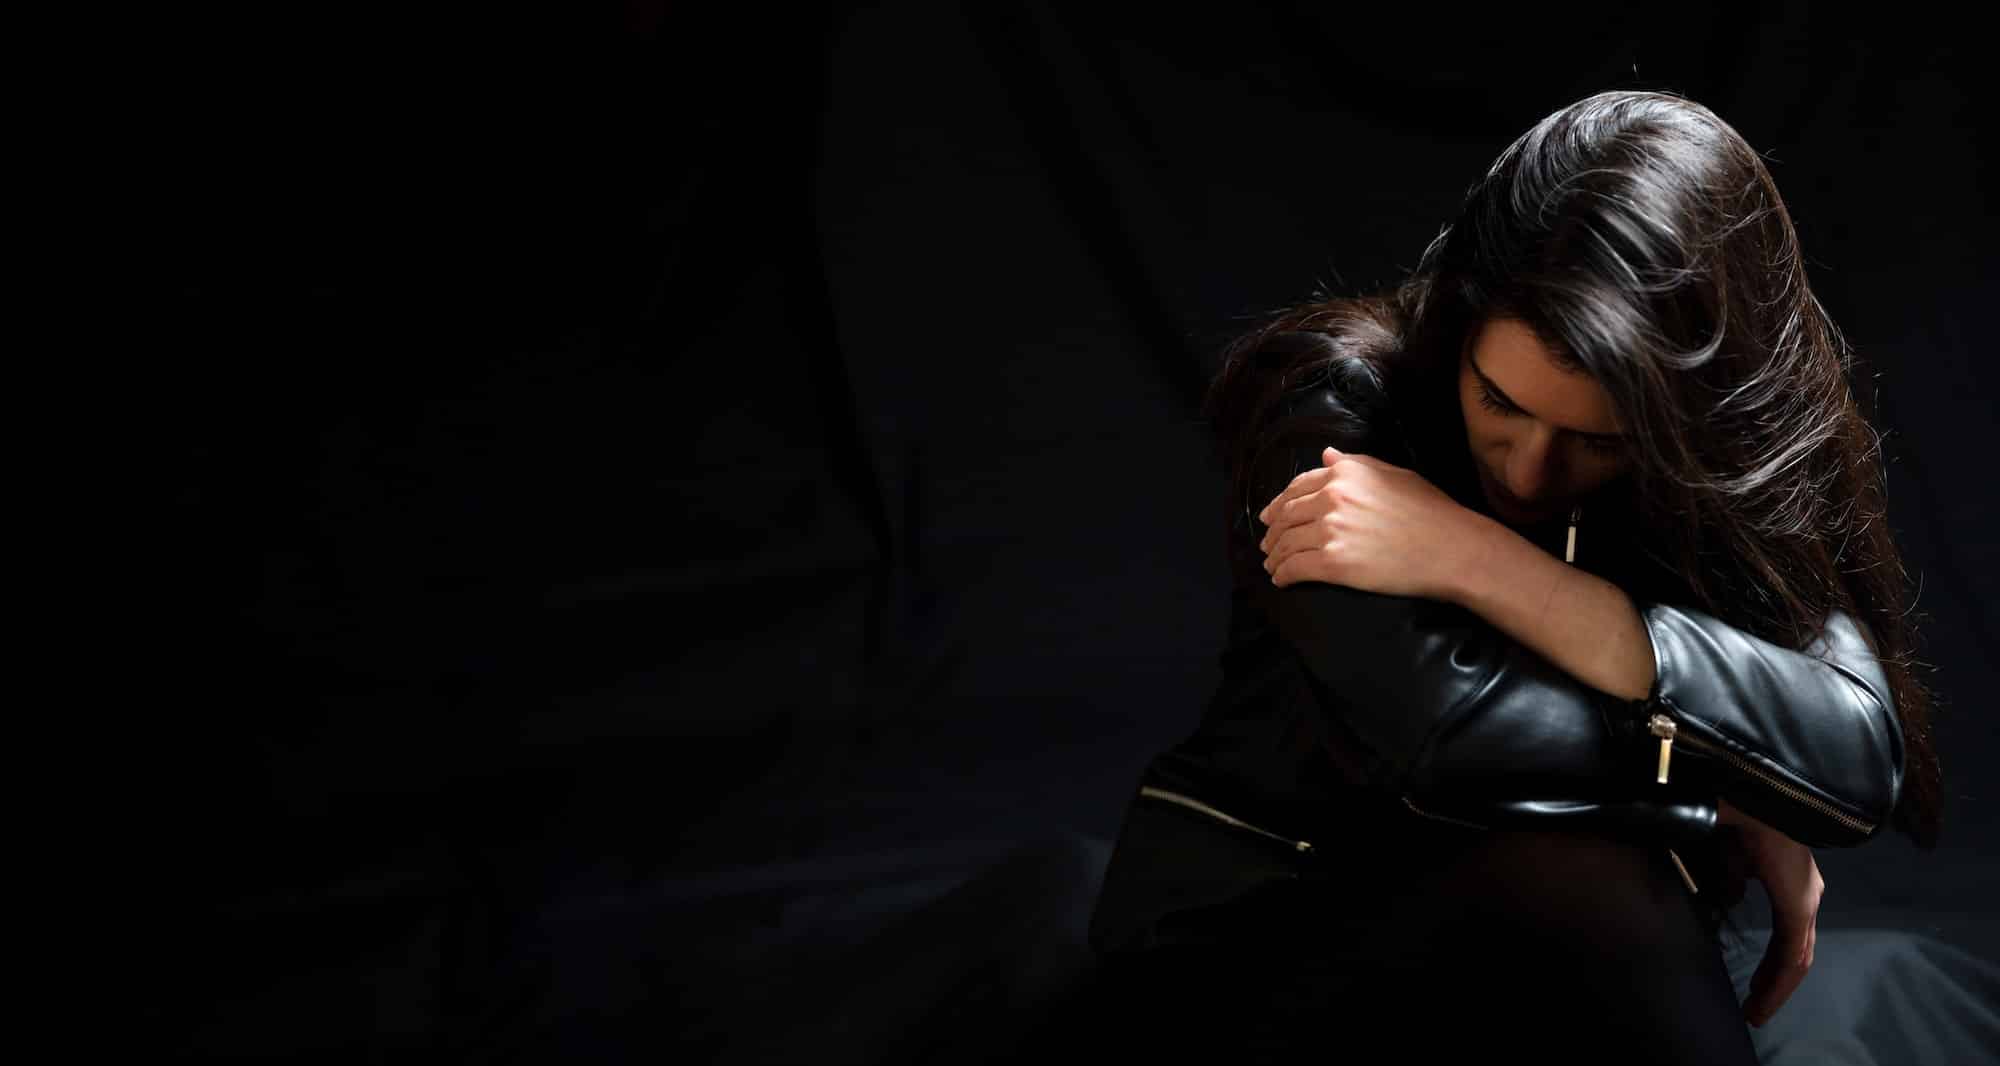 Young woman in a black leather jacket, sad and lonely in a dark room. Depression and grief